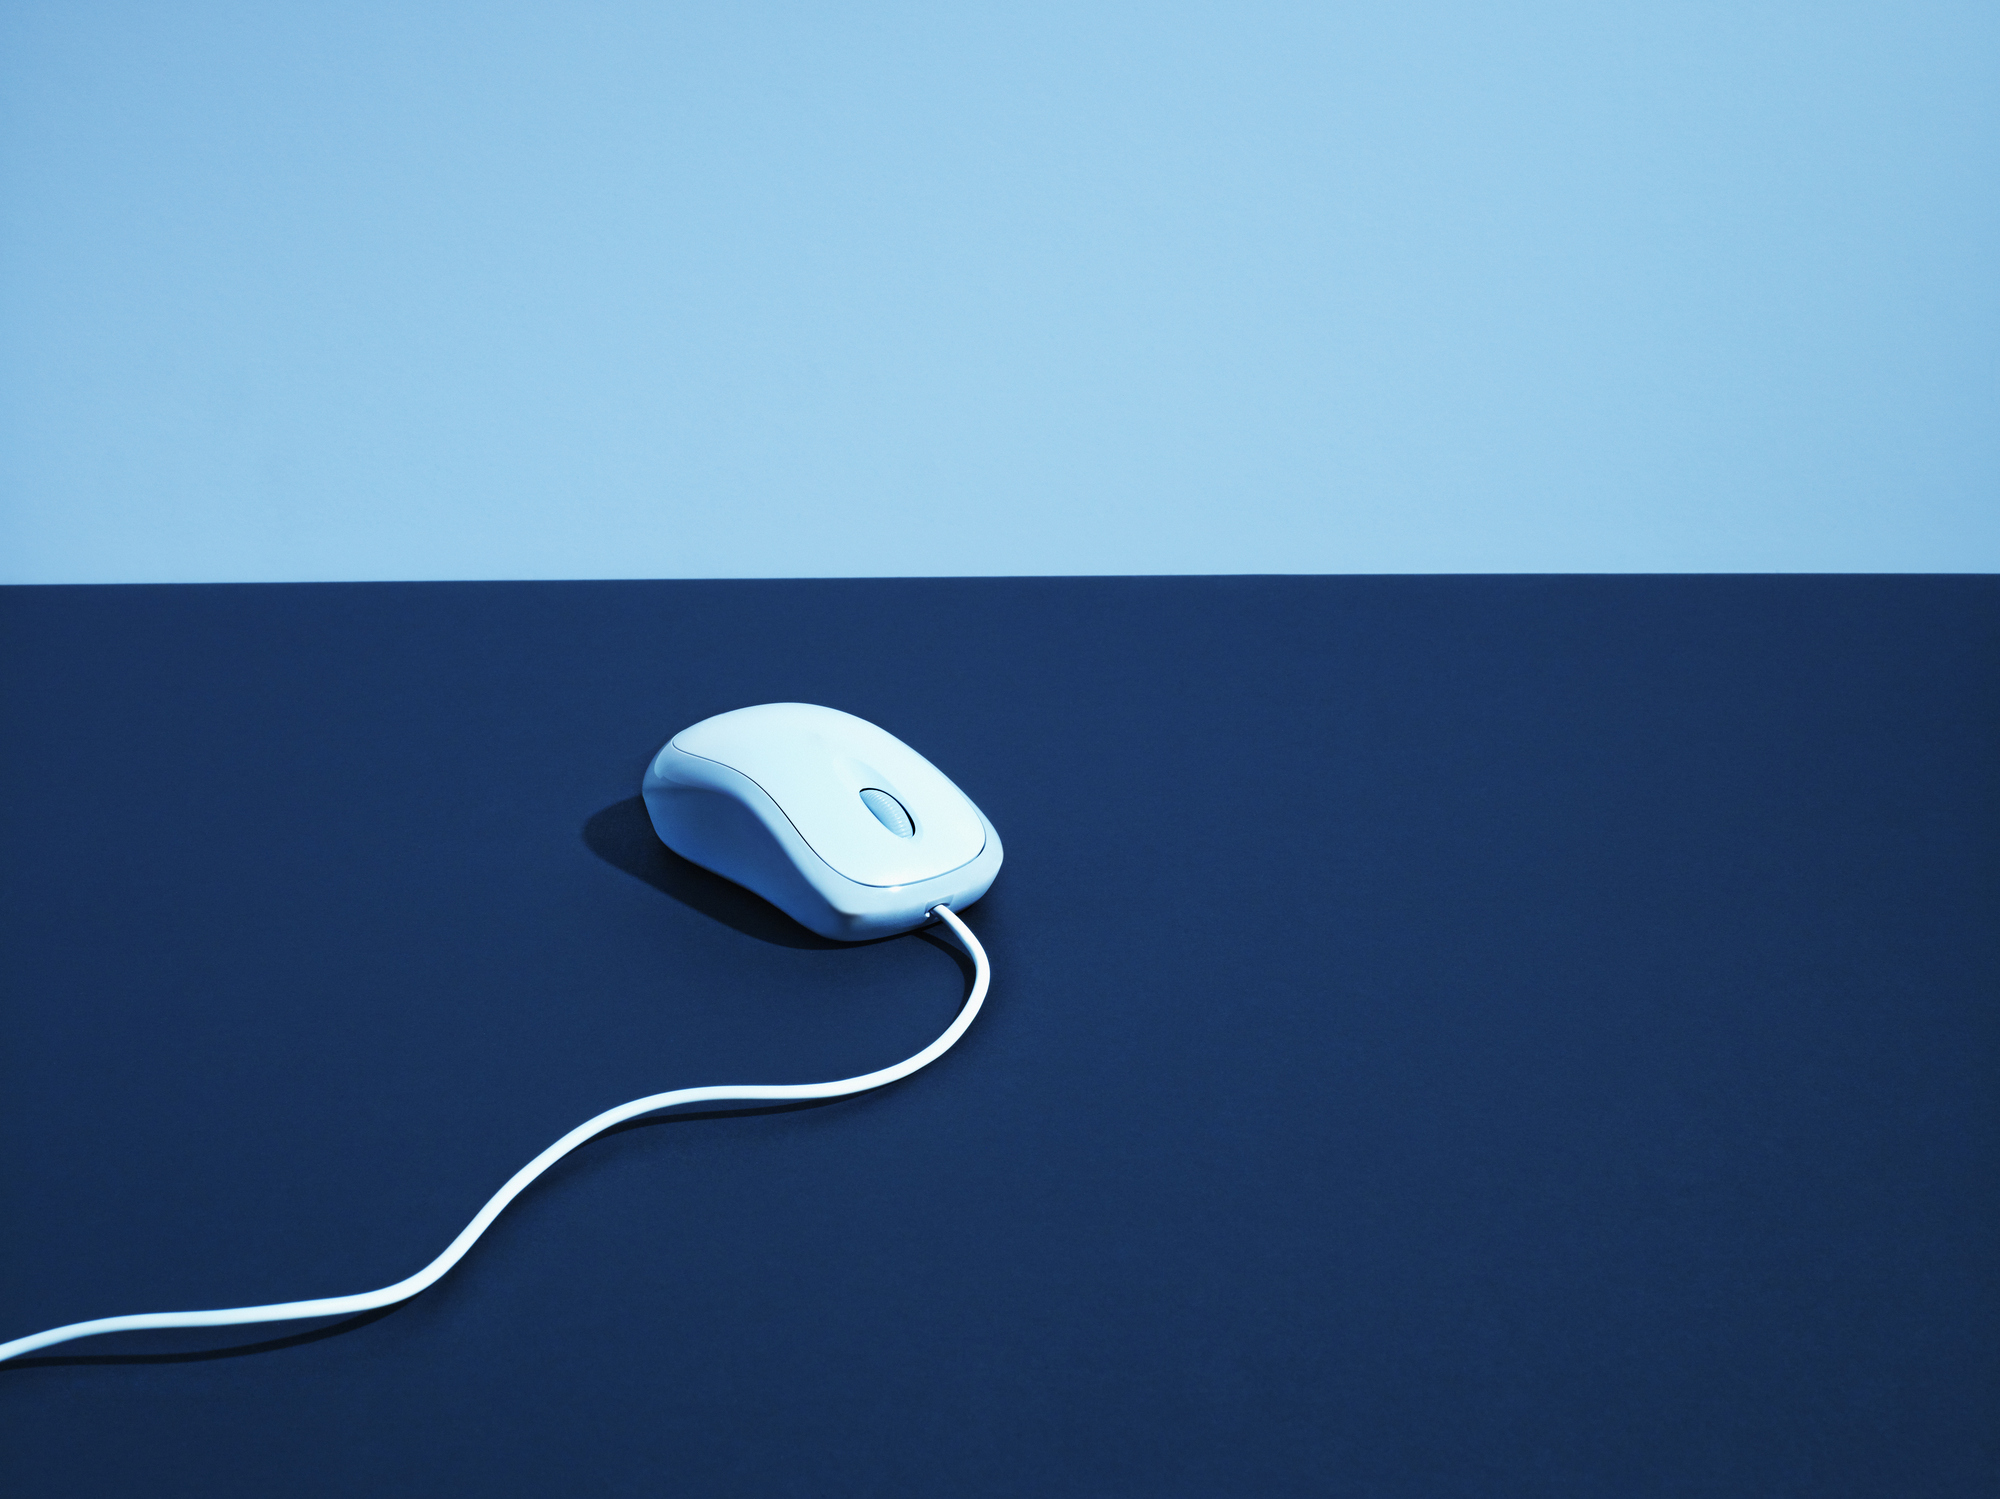 Computer mouse with cord (Getty Images)